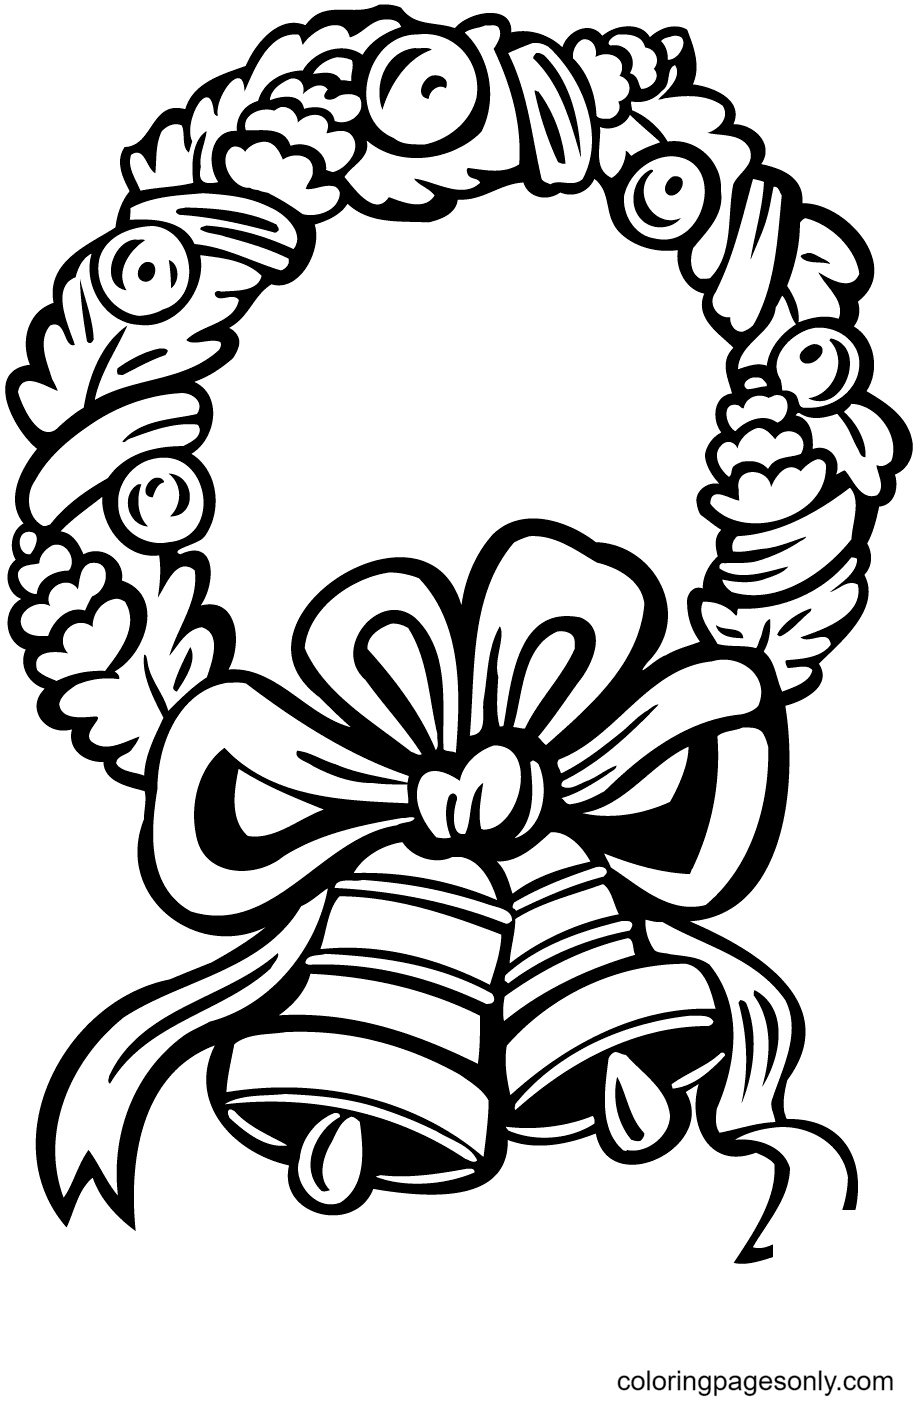 Christmas Wreath with Jingle Bells Coloring Pages